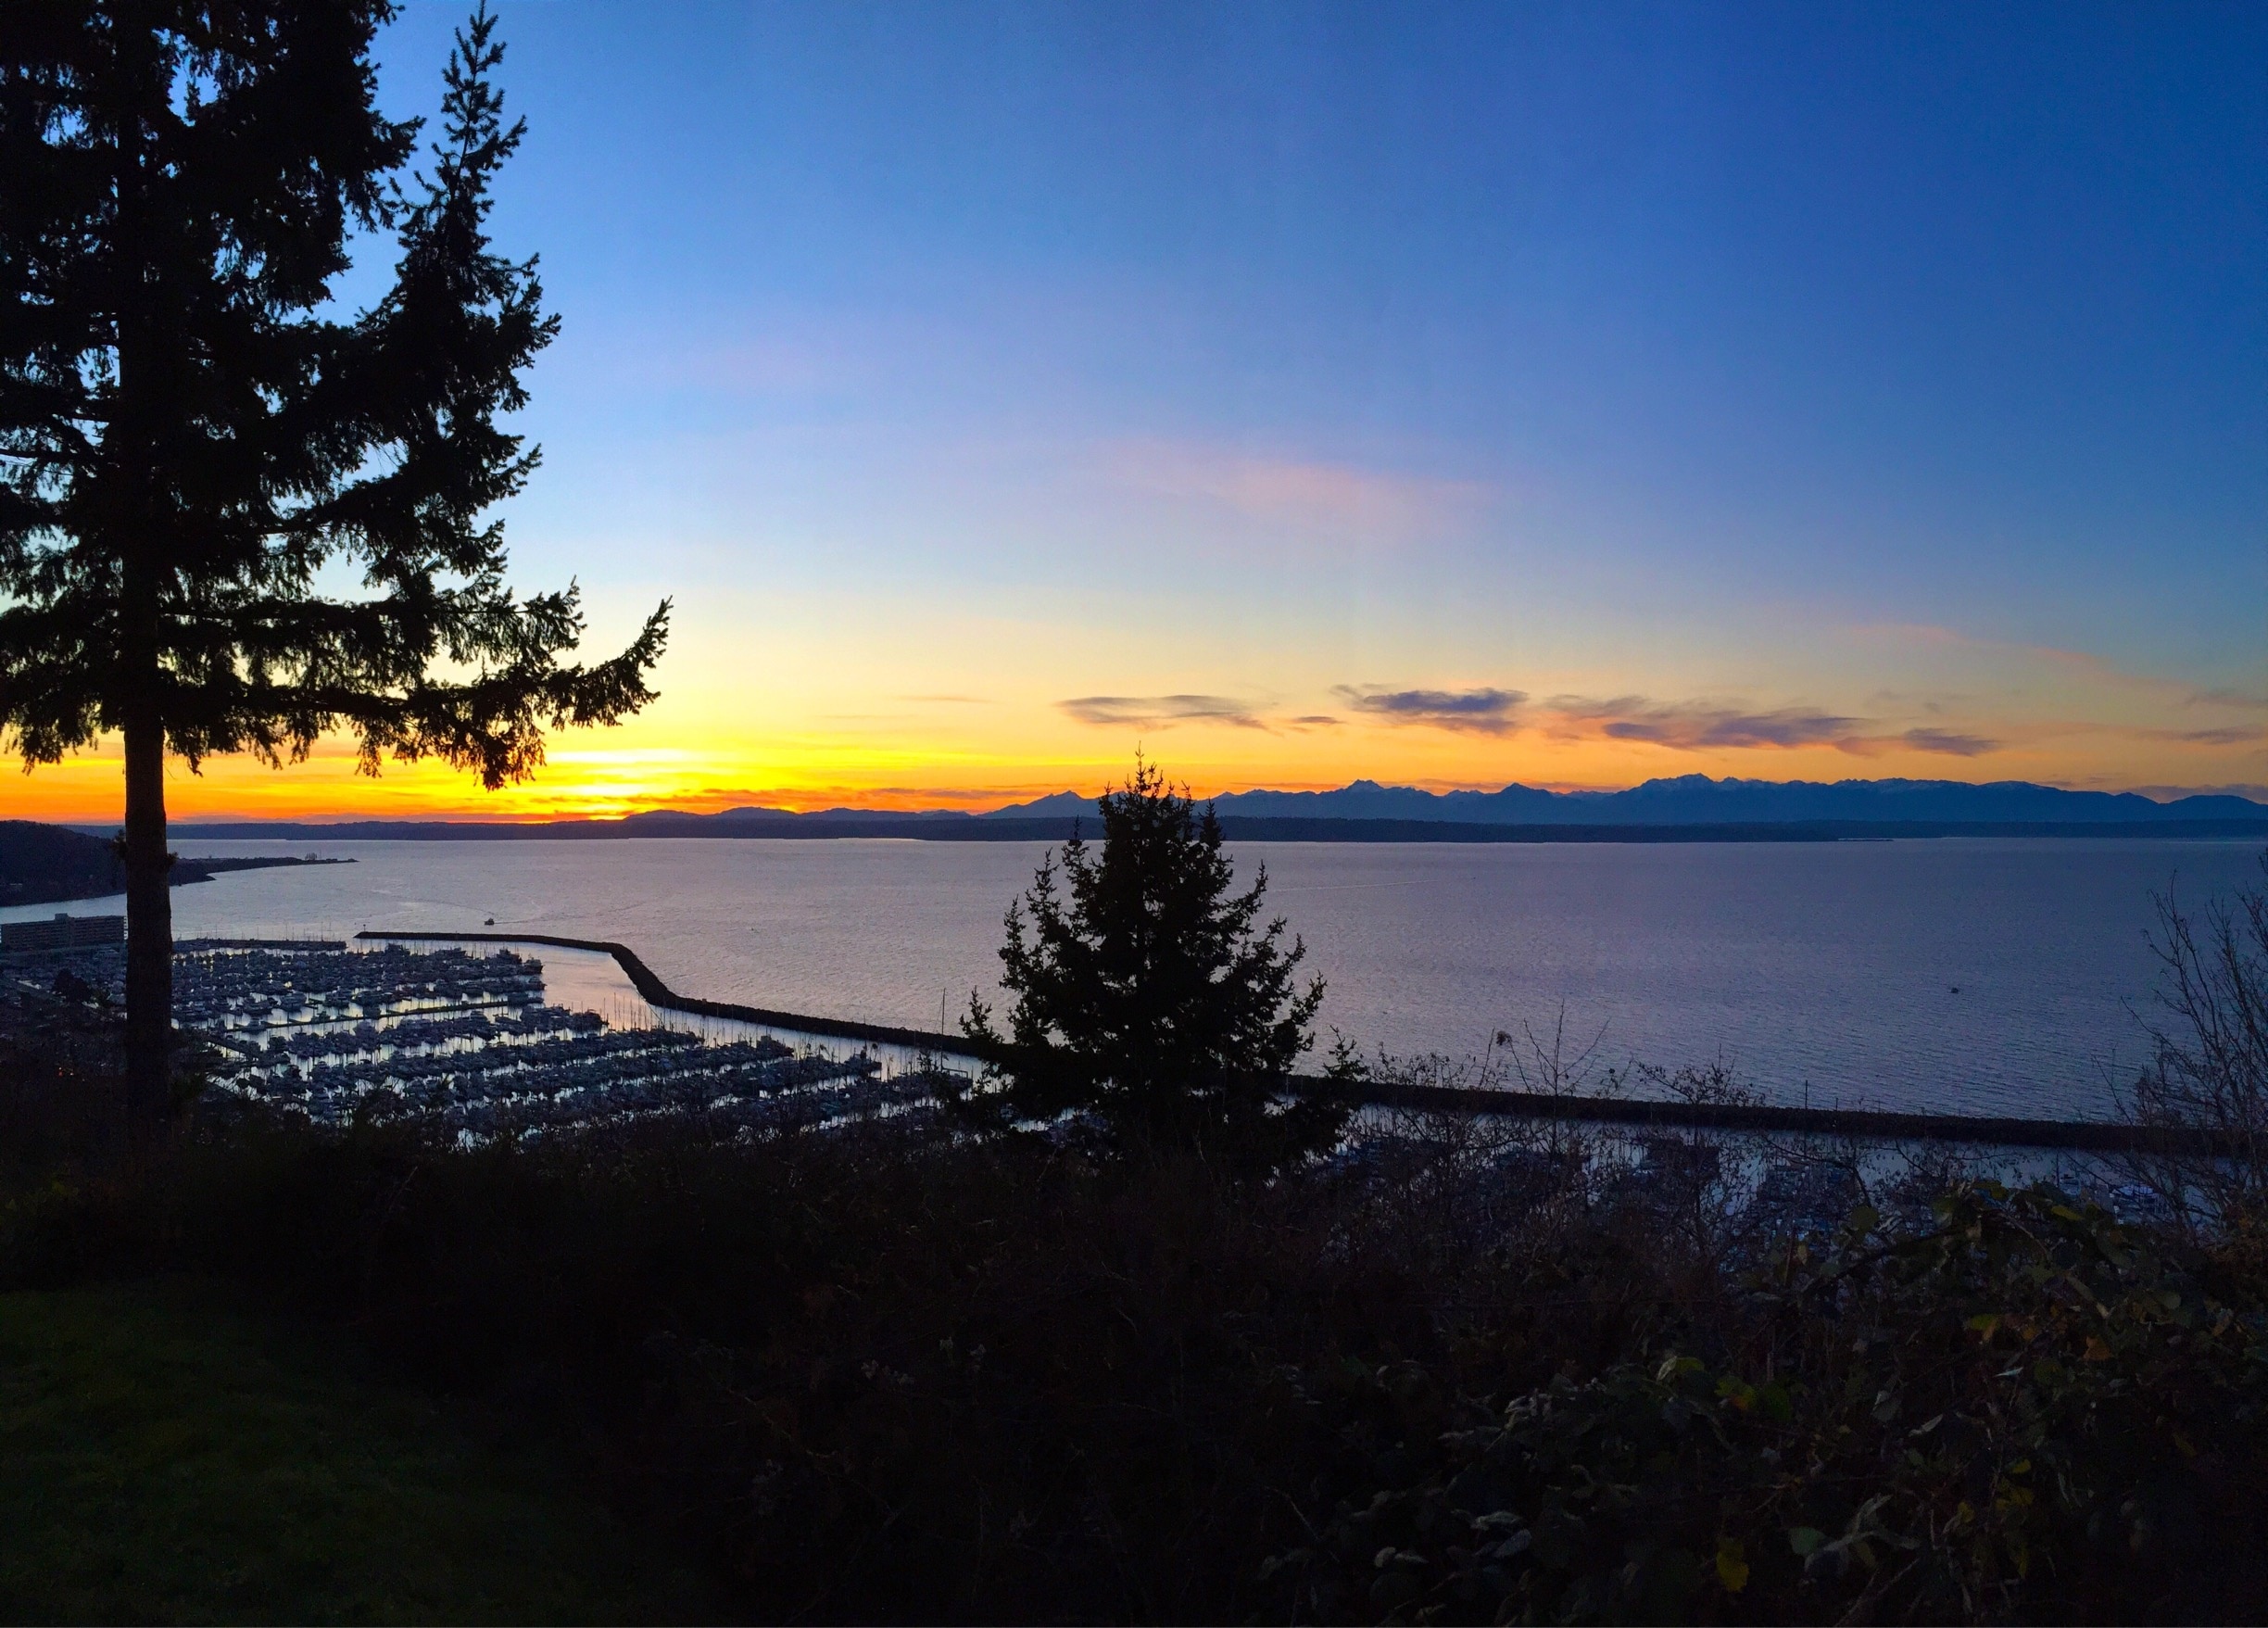 The sun sets over Shilshole Bay and the Marina. Come to Sunset Hill Park for some of Seattle's most picturesque sunsets over the water and mountains.

#lifeatexpedia